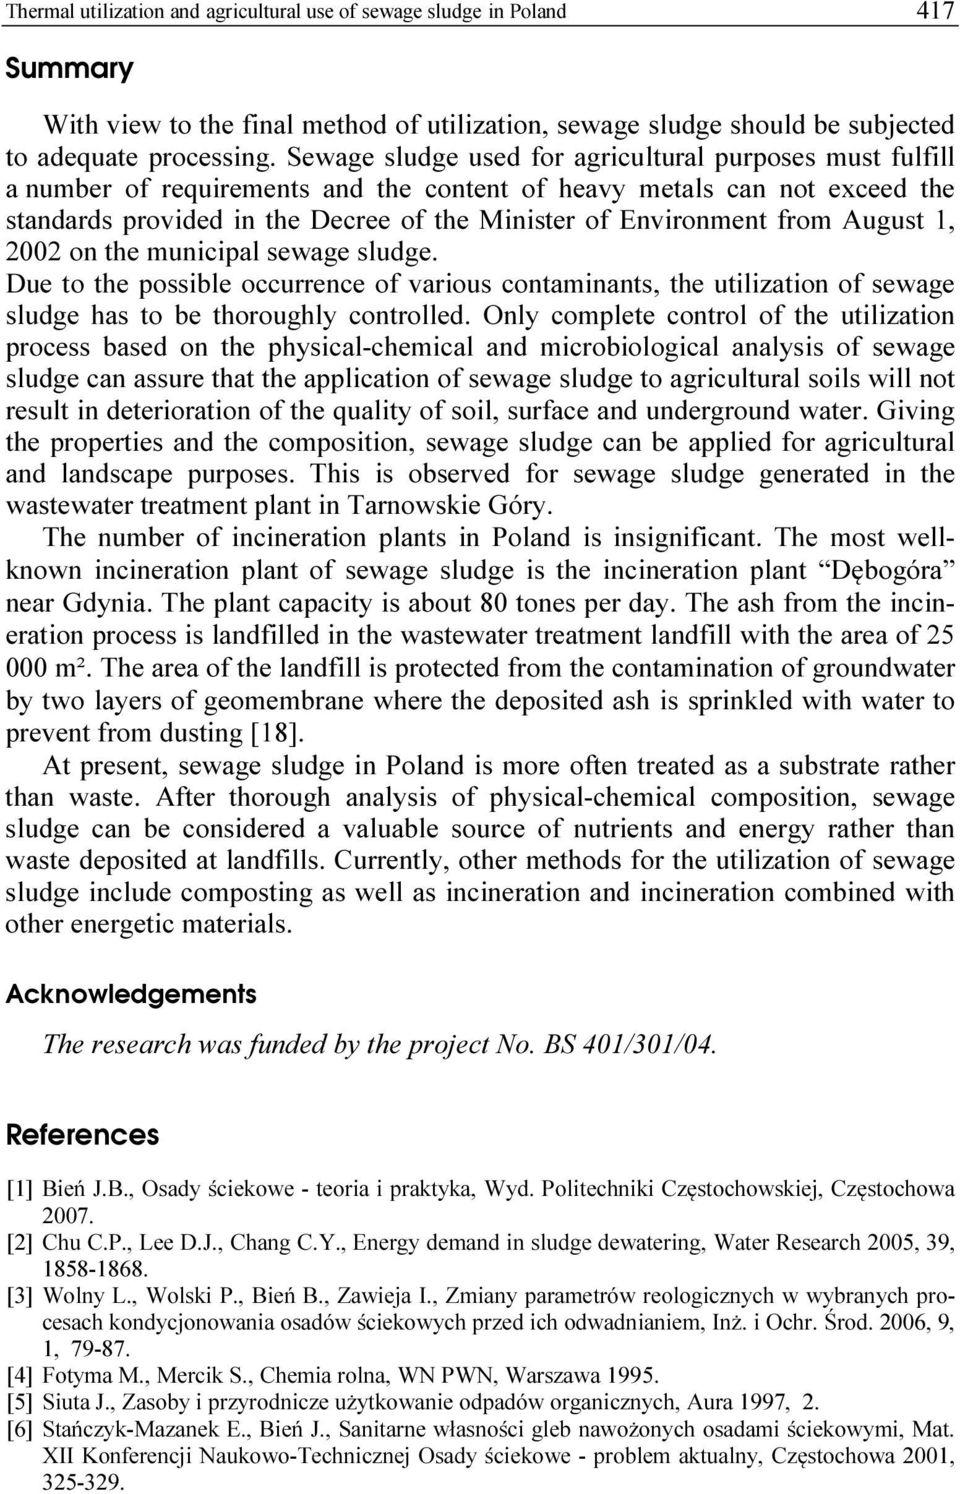 from August, 2002 on the municipal sewage sludge. Due to the possible occurrence of various contaminants, the utilization of sewage sludge has to be thoroughly controlled.